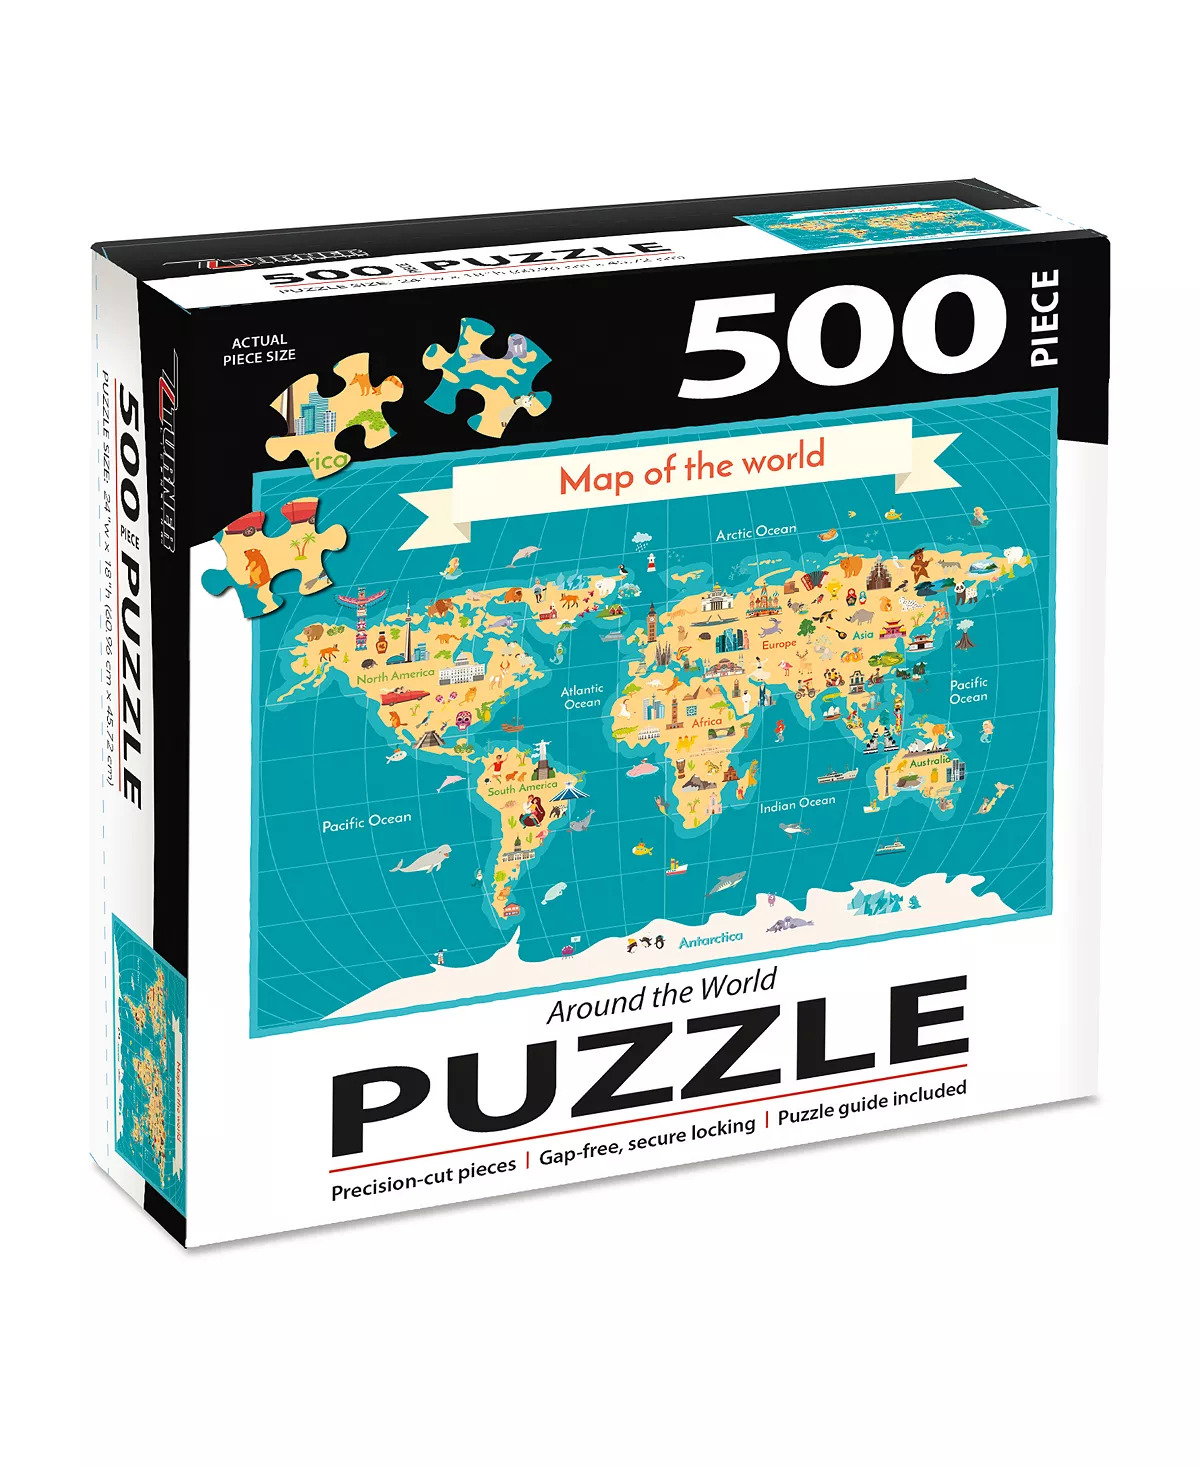 500-Piece Lang Jigsaw Puzzles (Various Styles) $5.93 + SD Cashback + Free Store Pickup at Macy's or FS on $25+